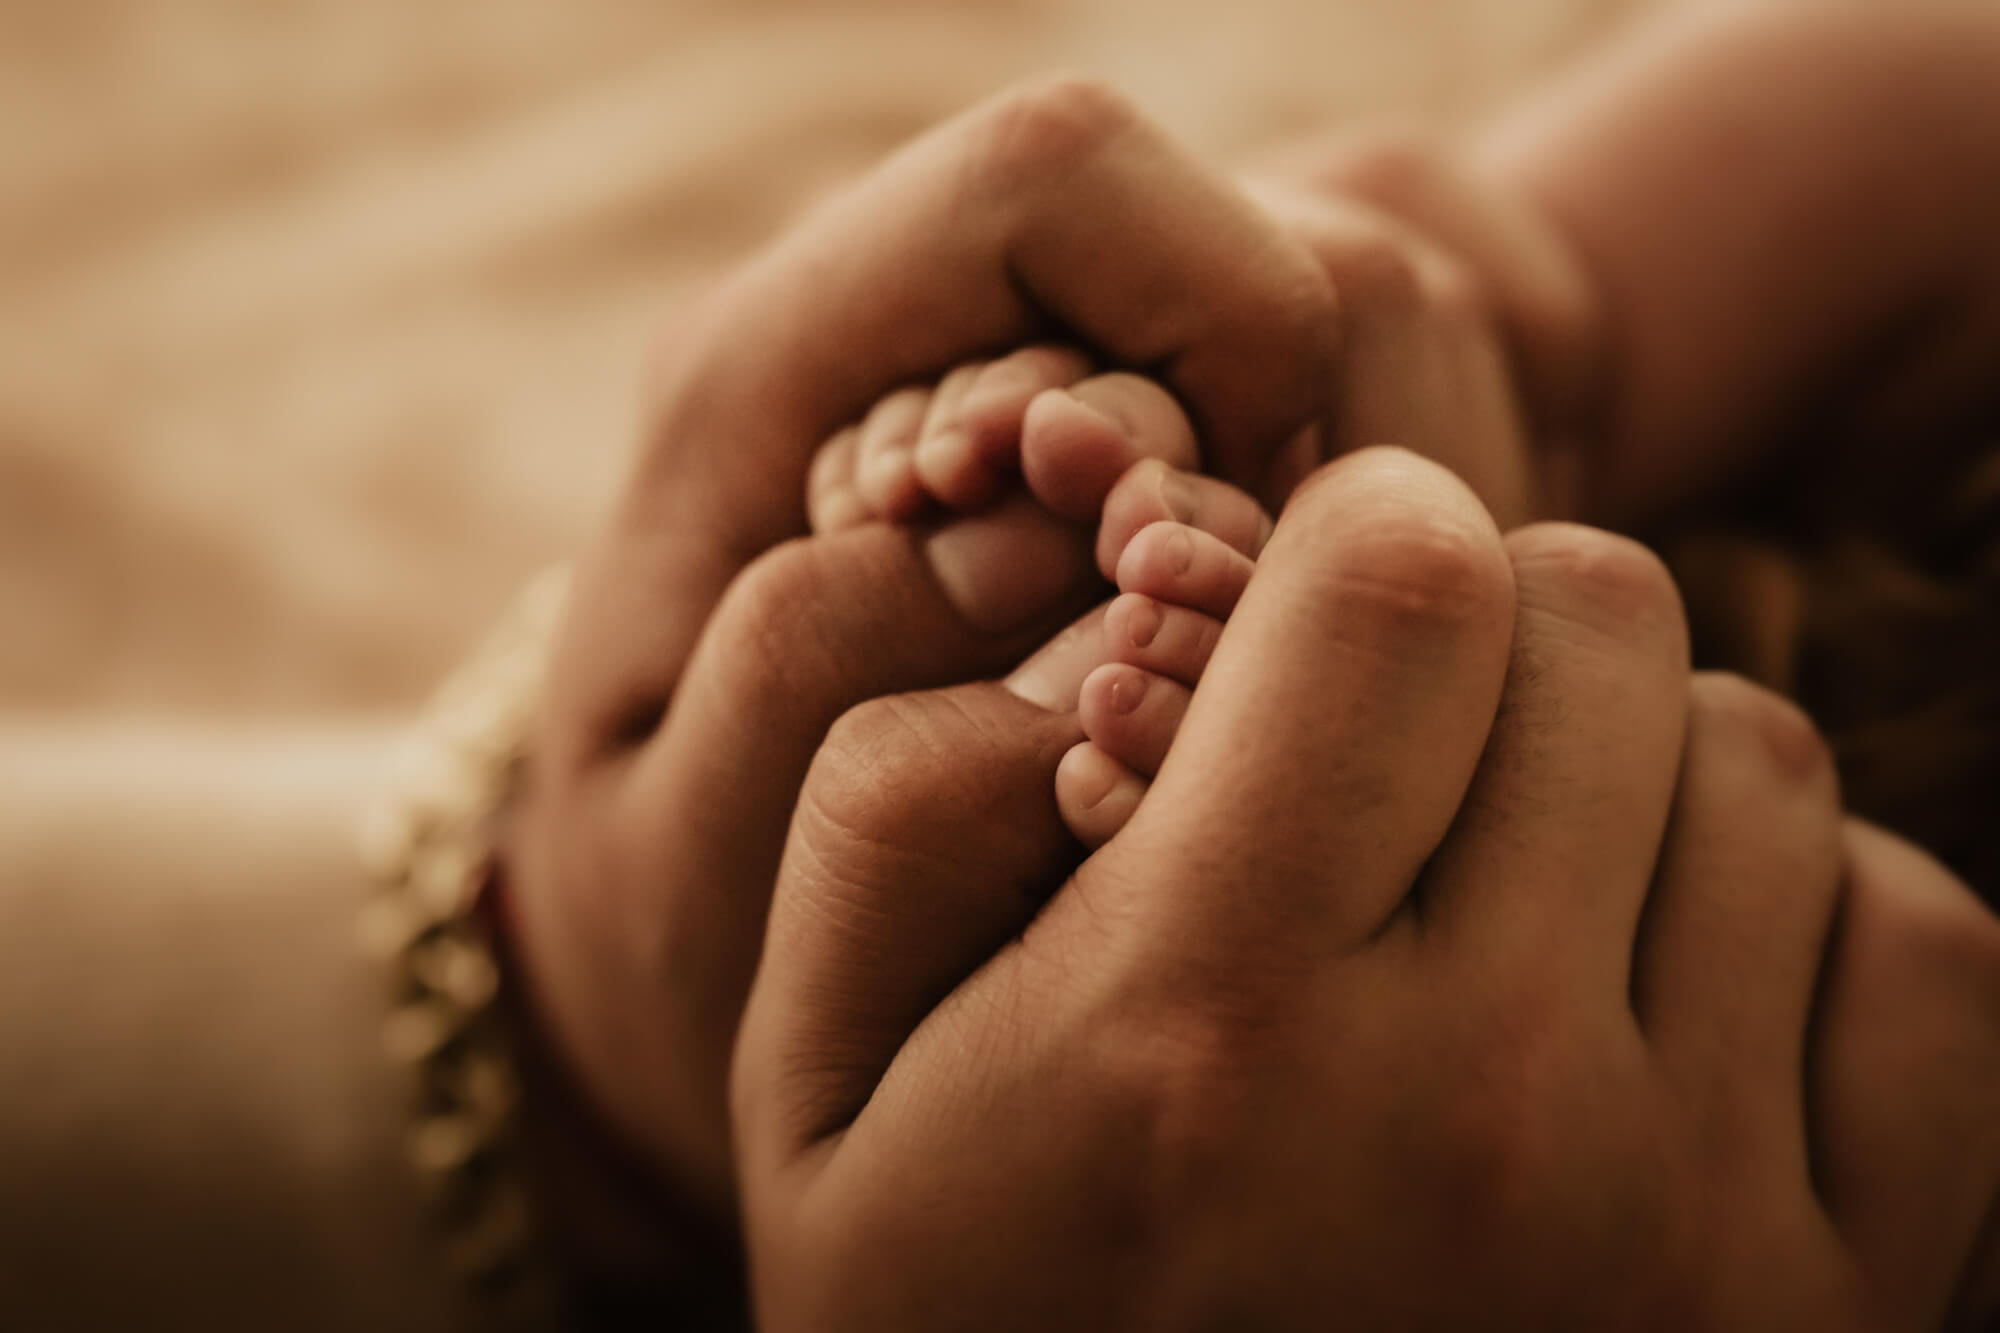 Details of a parent holding their newborn baby’s feet beautifully connected